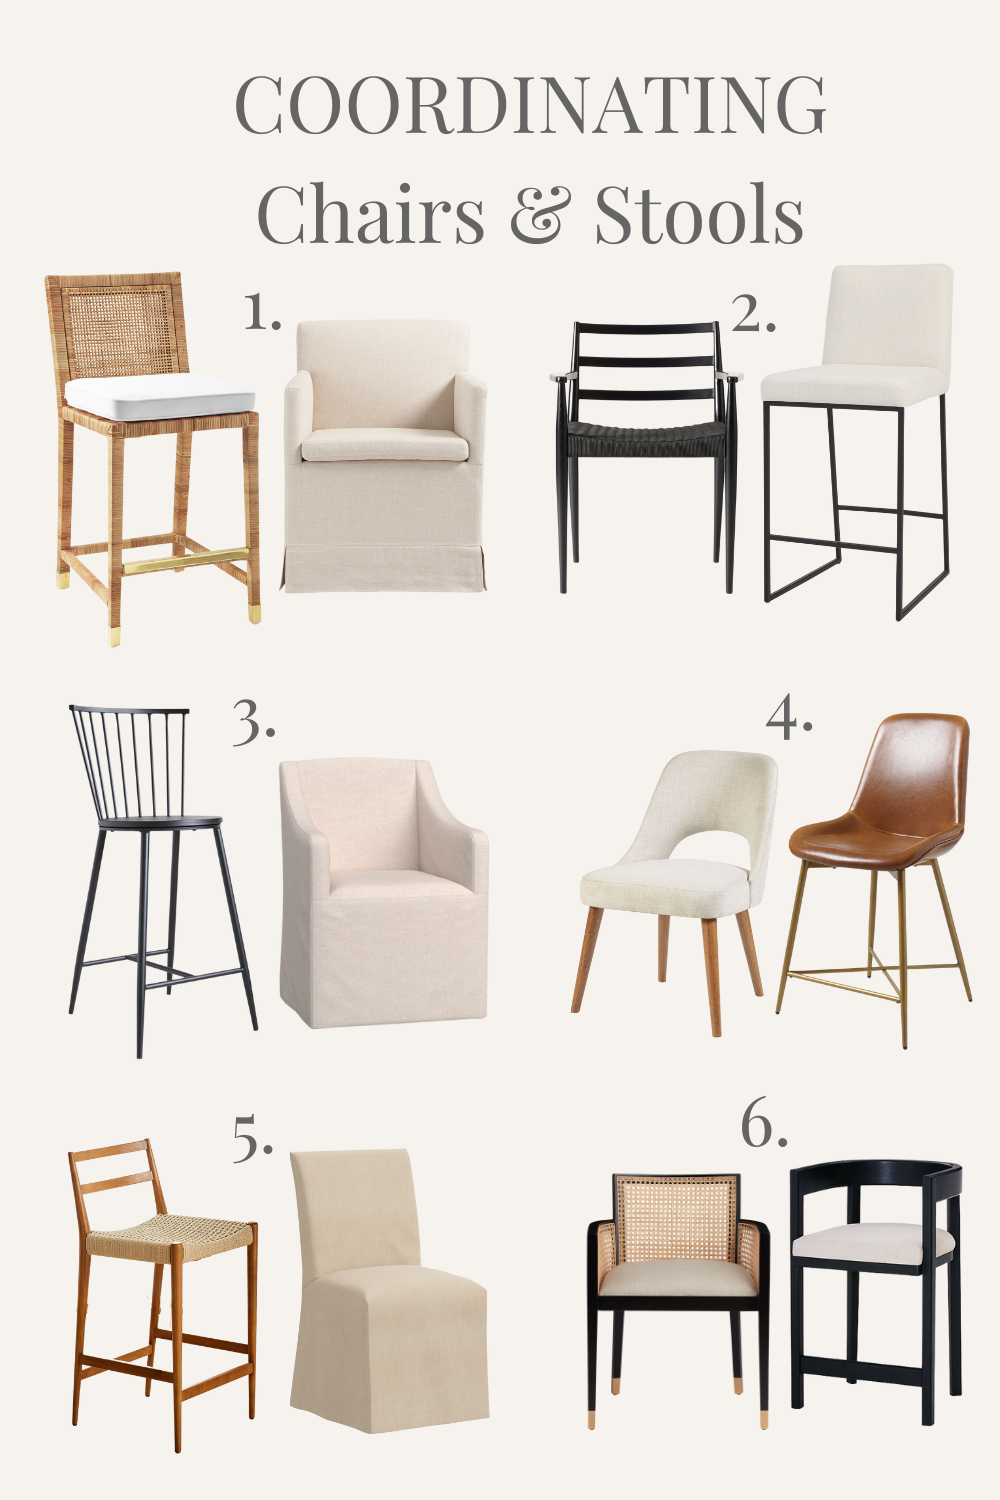 graphic showing multiple coordinating dining chairs and stools